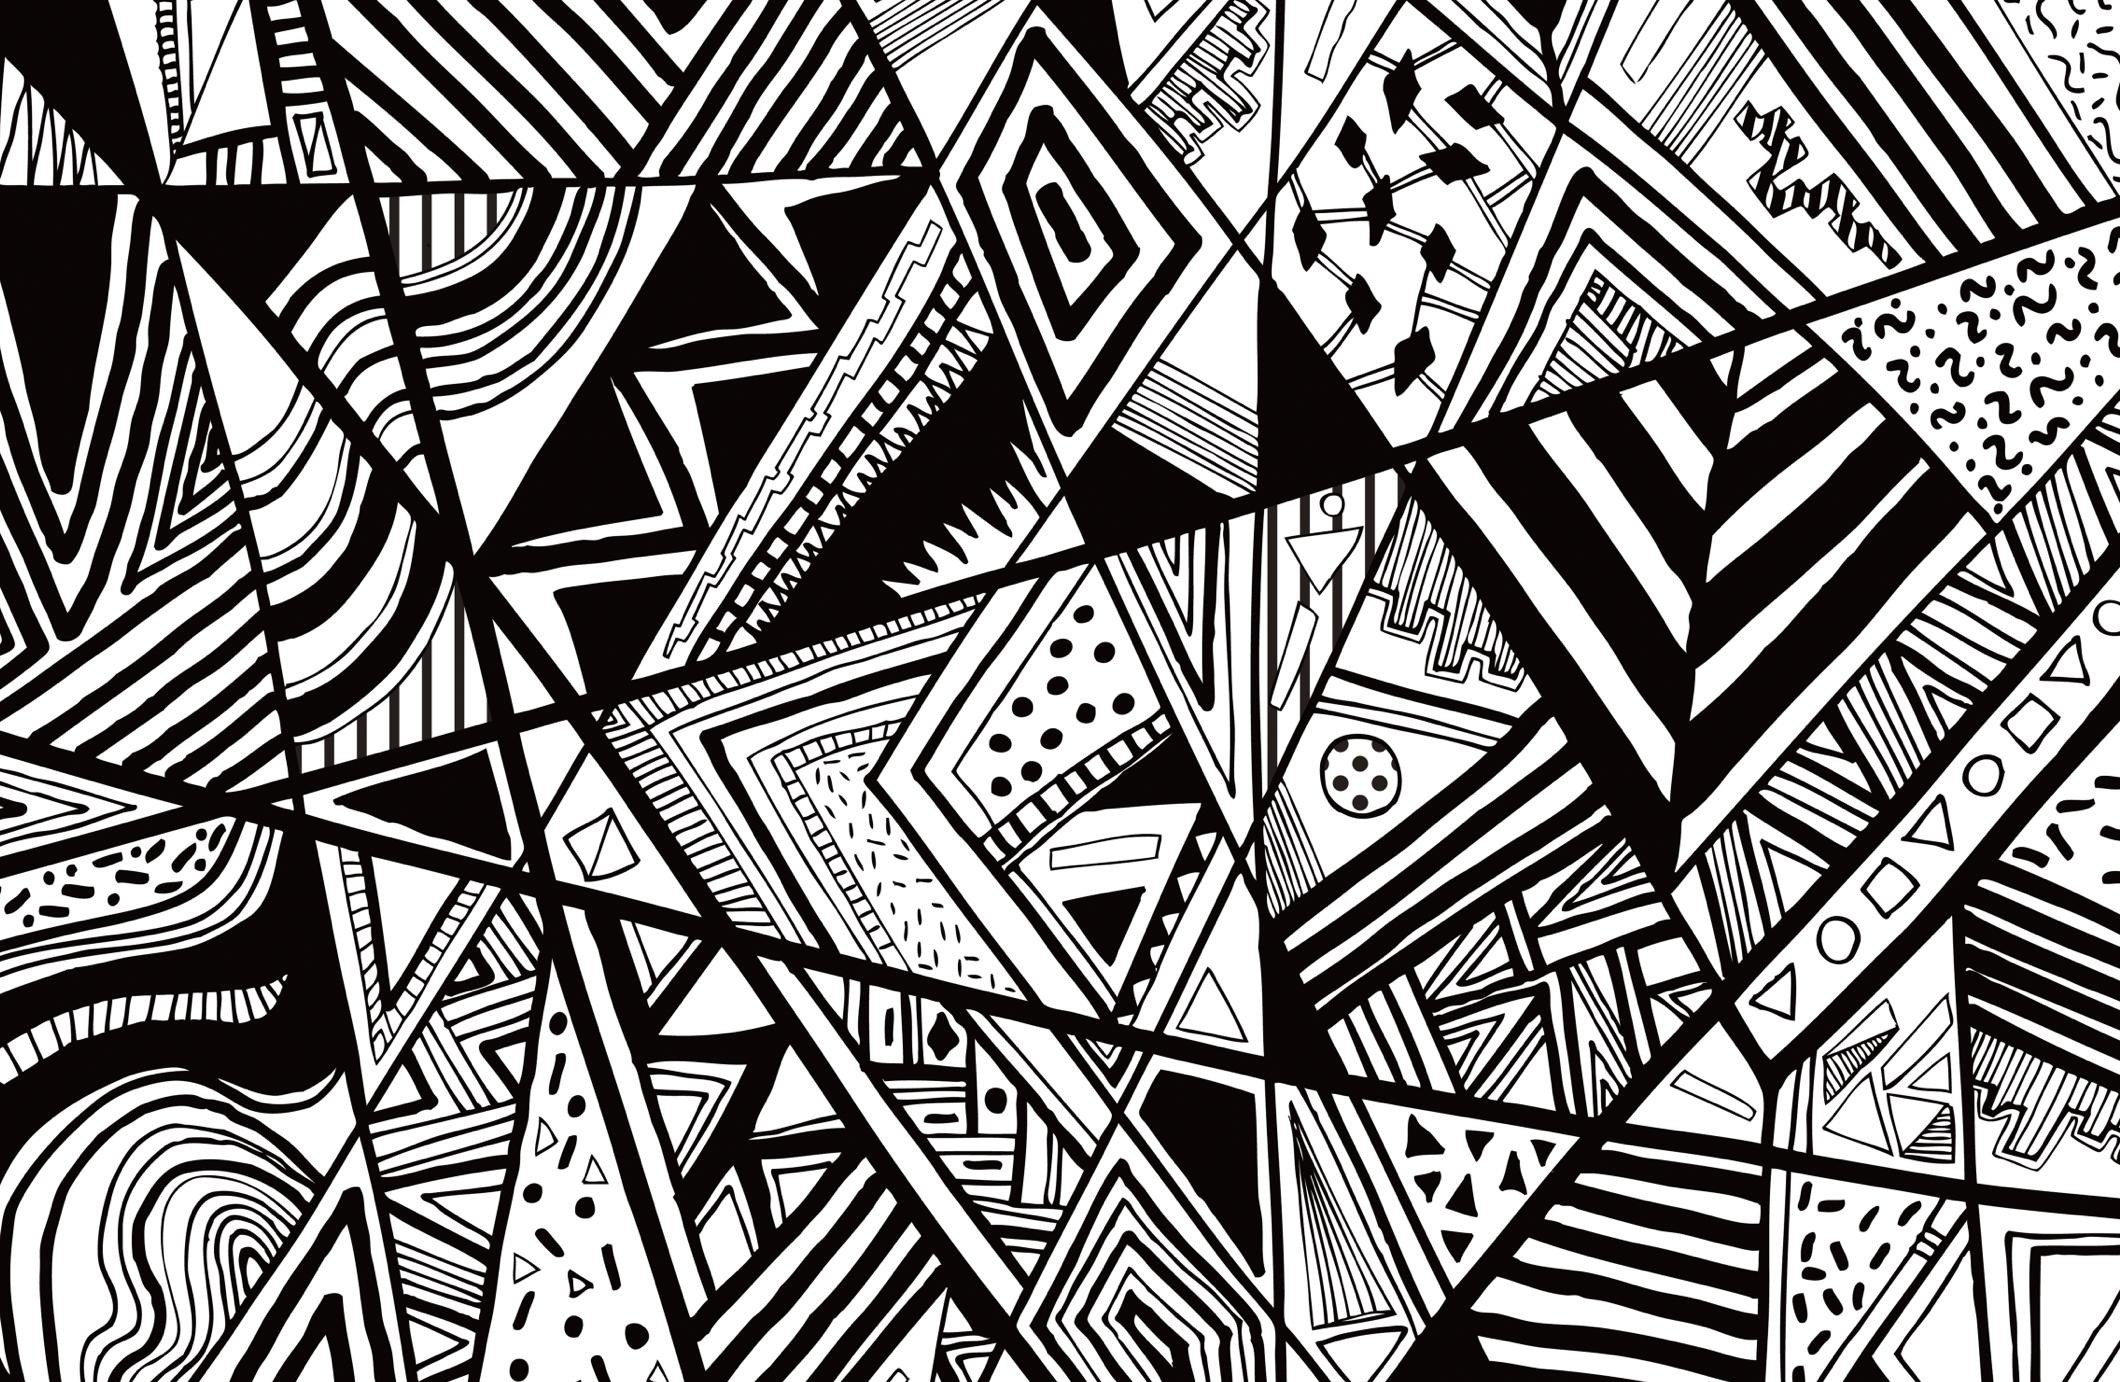 2120x1382 Image Black And White Abstract